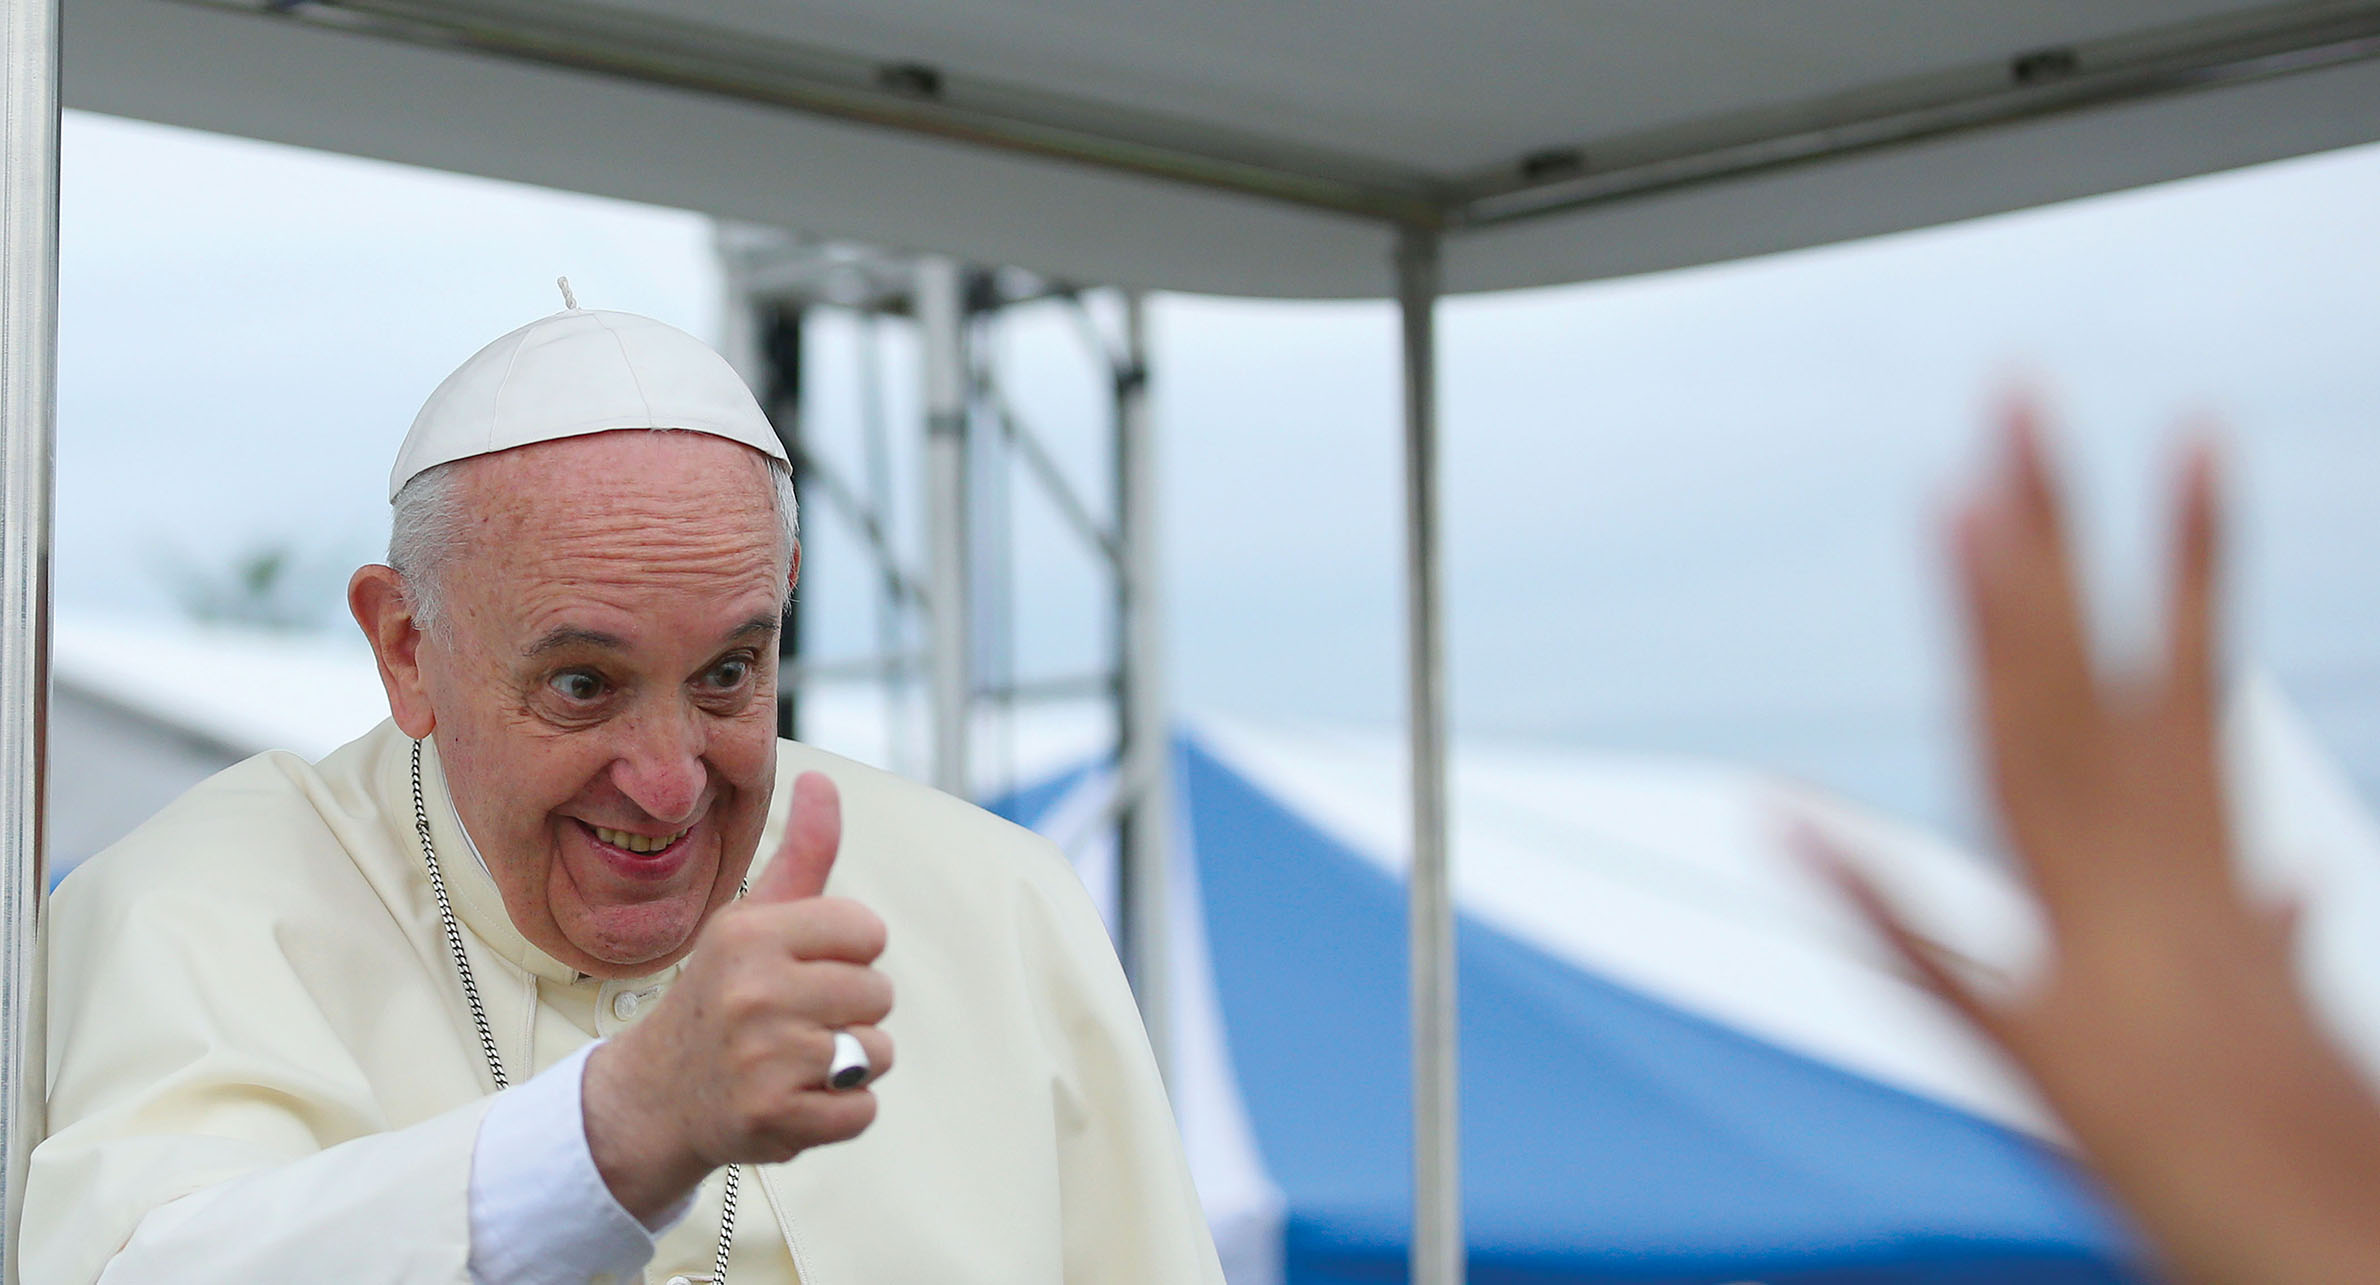 A smiling Pope Francis gives a thumbs up during an event in Seoul, South Korea. (Photo by Jeon Han/Korea.net.)